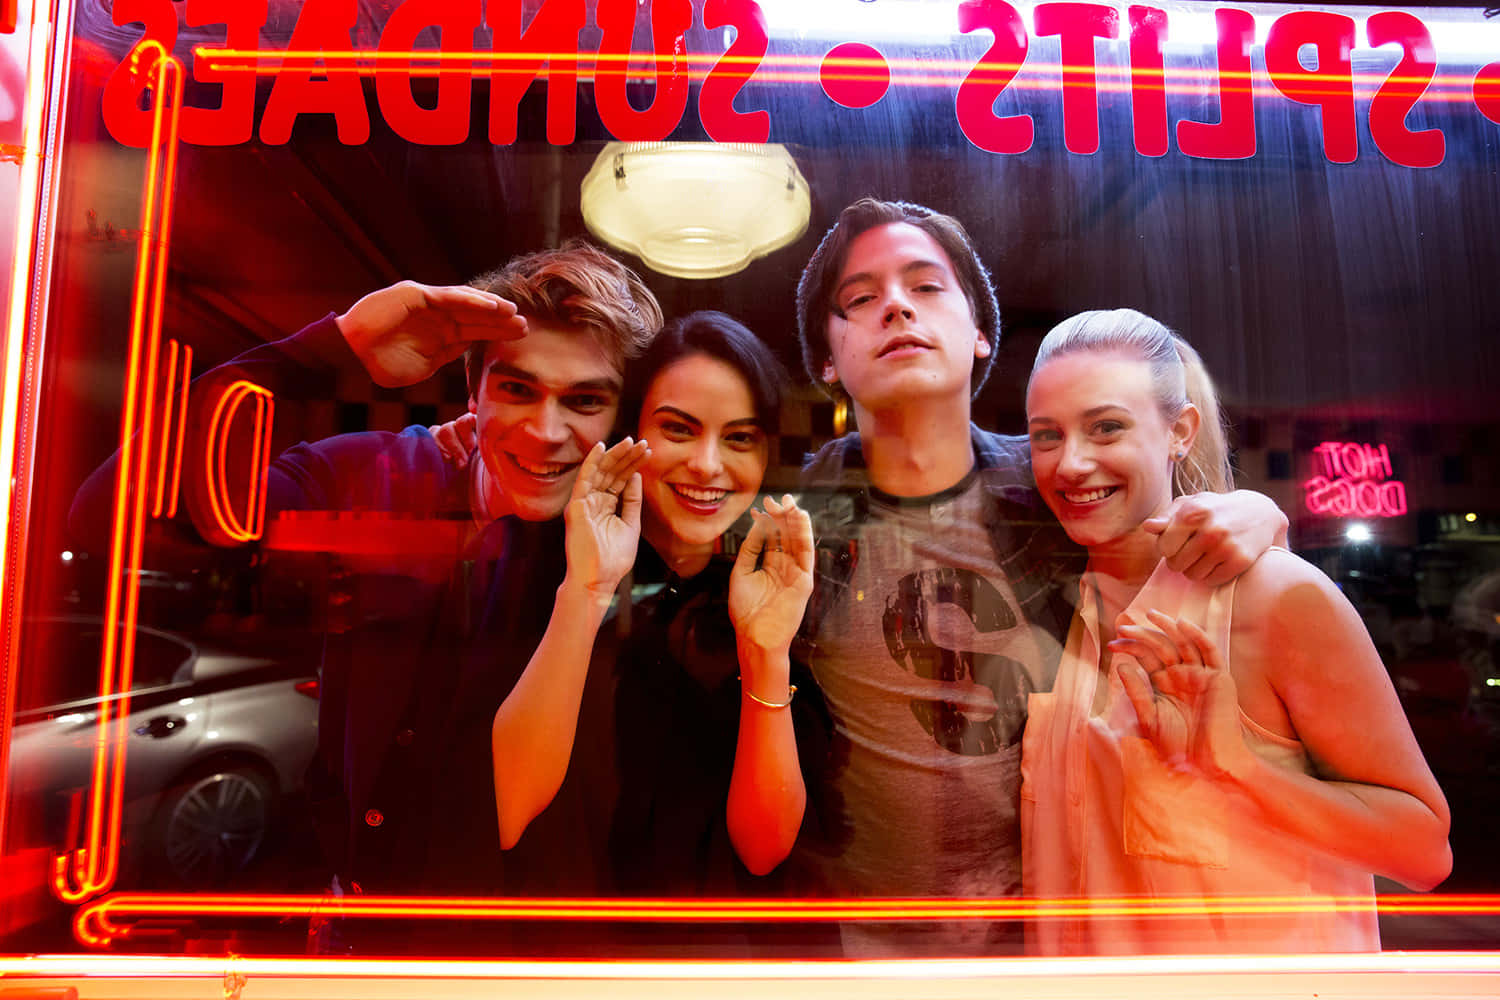 Download Riverdale - Core Four on a mission